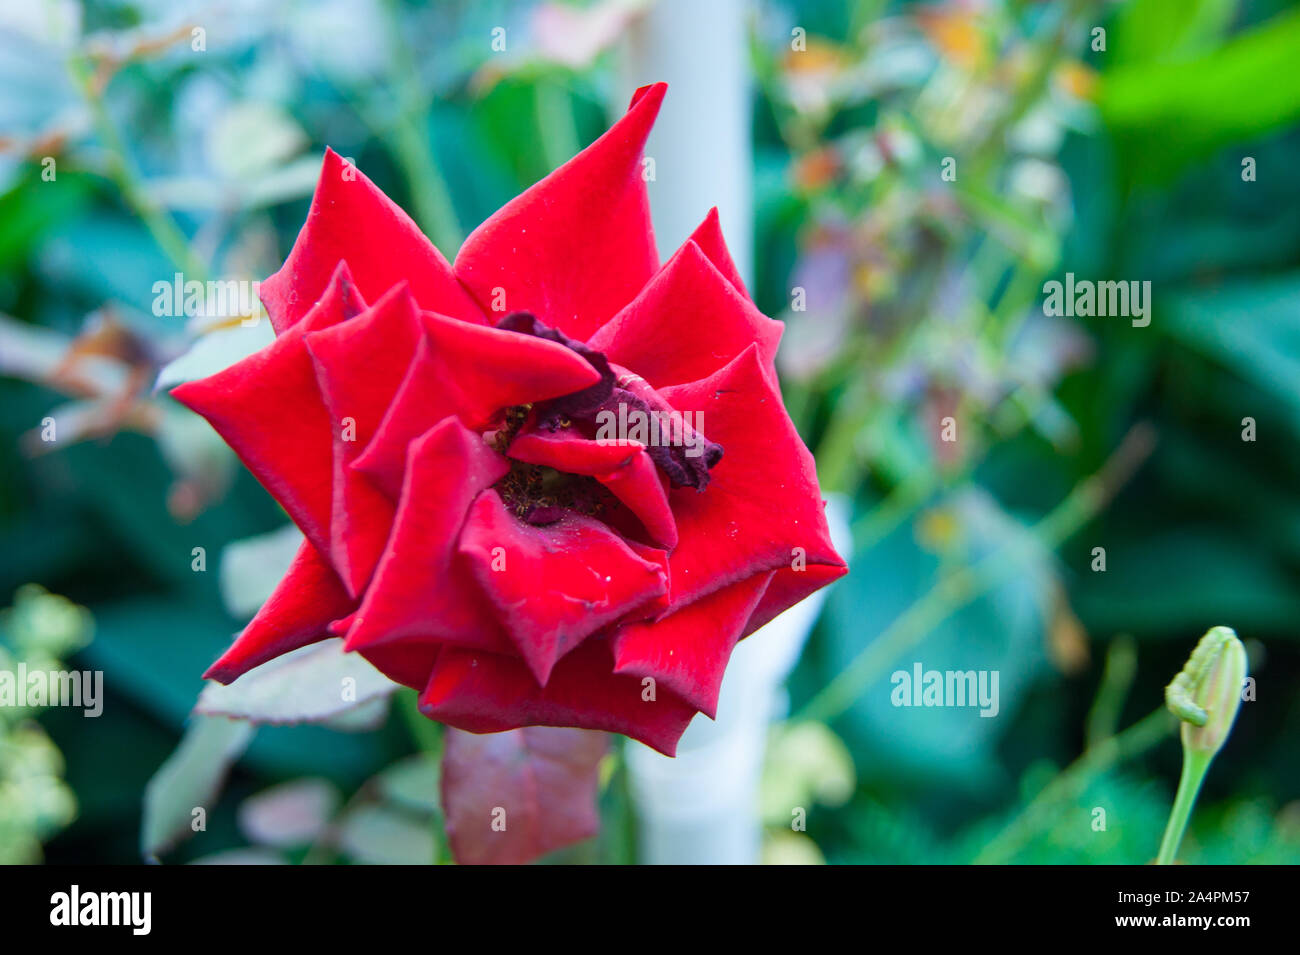 Red rose with sharp corner petals on a blurry background of green grass and foliage. Stock Photo